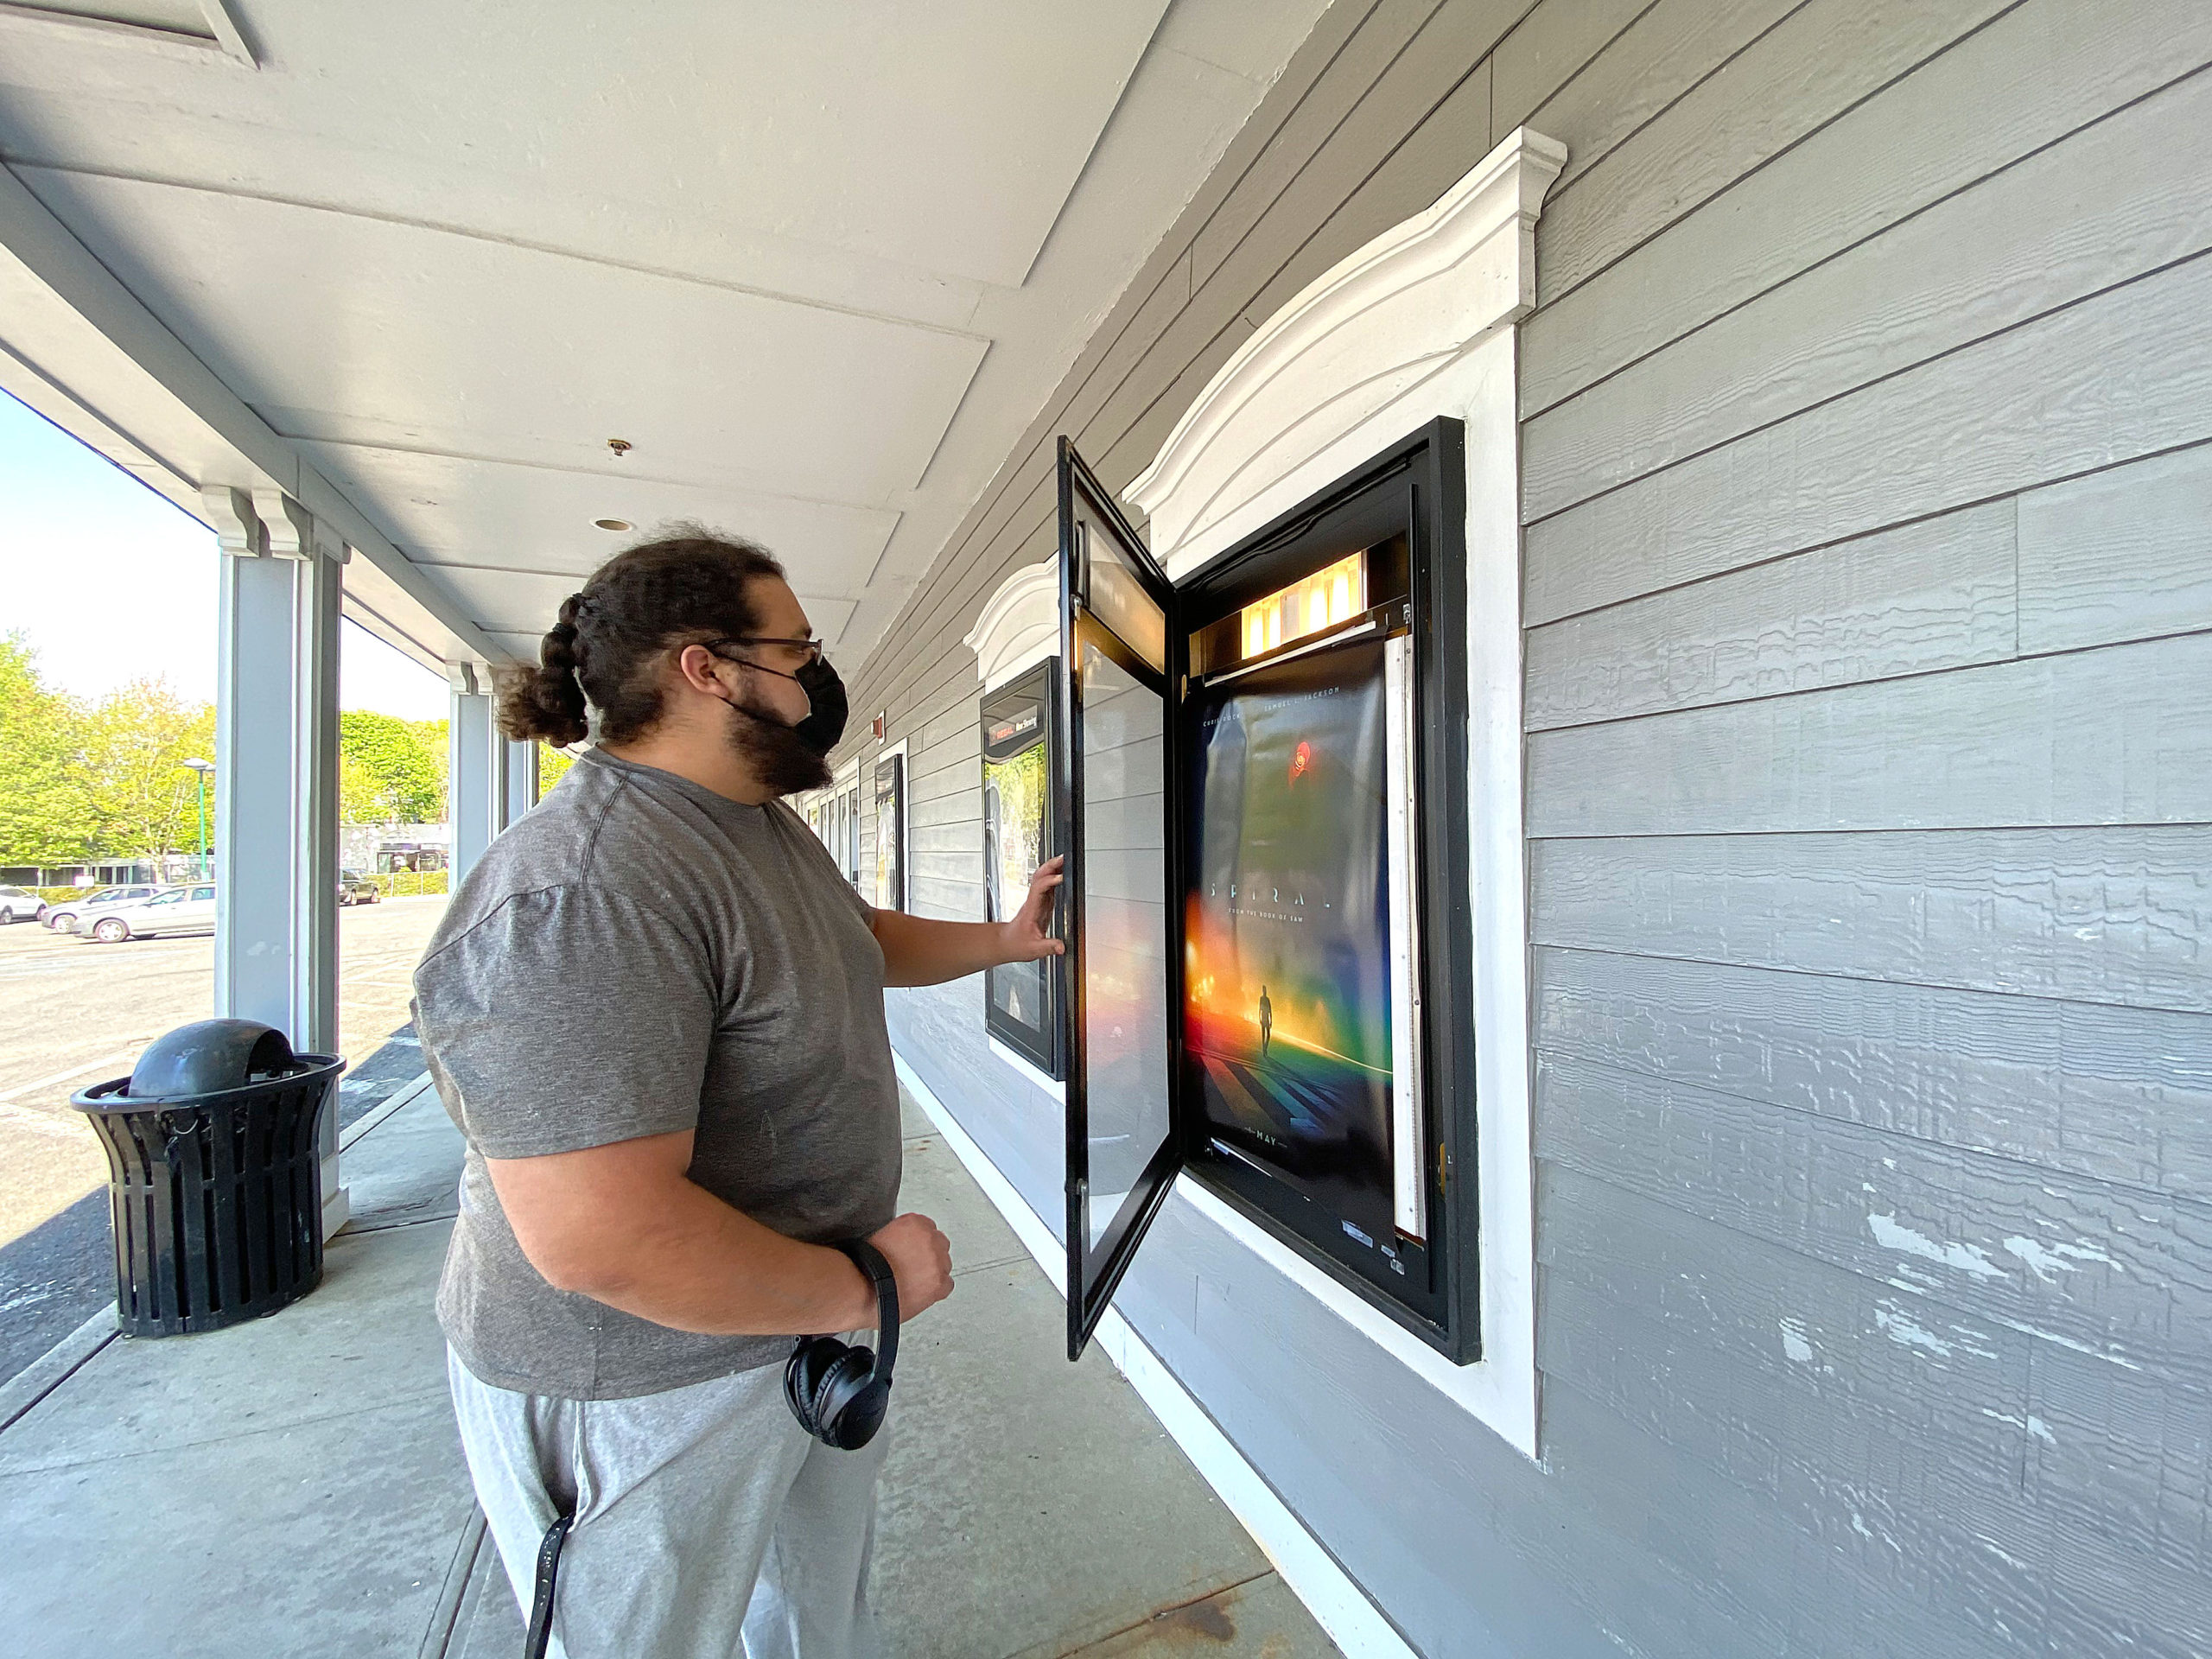 An employee replaces the now showing posters at the Hampton Bays United Artists movie theater on Monday. The theater is set to reopen May 21 under the company’s “CinemaSafe” COVID-19 guidelines.  DANA SHAW